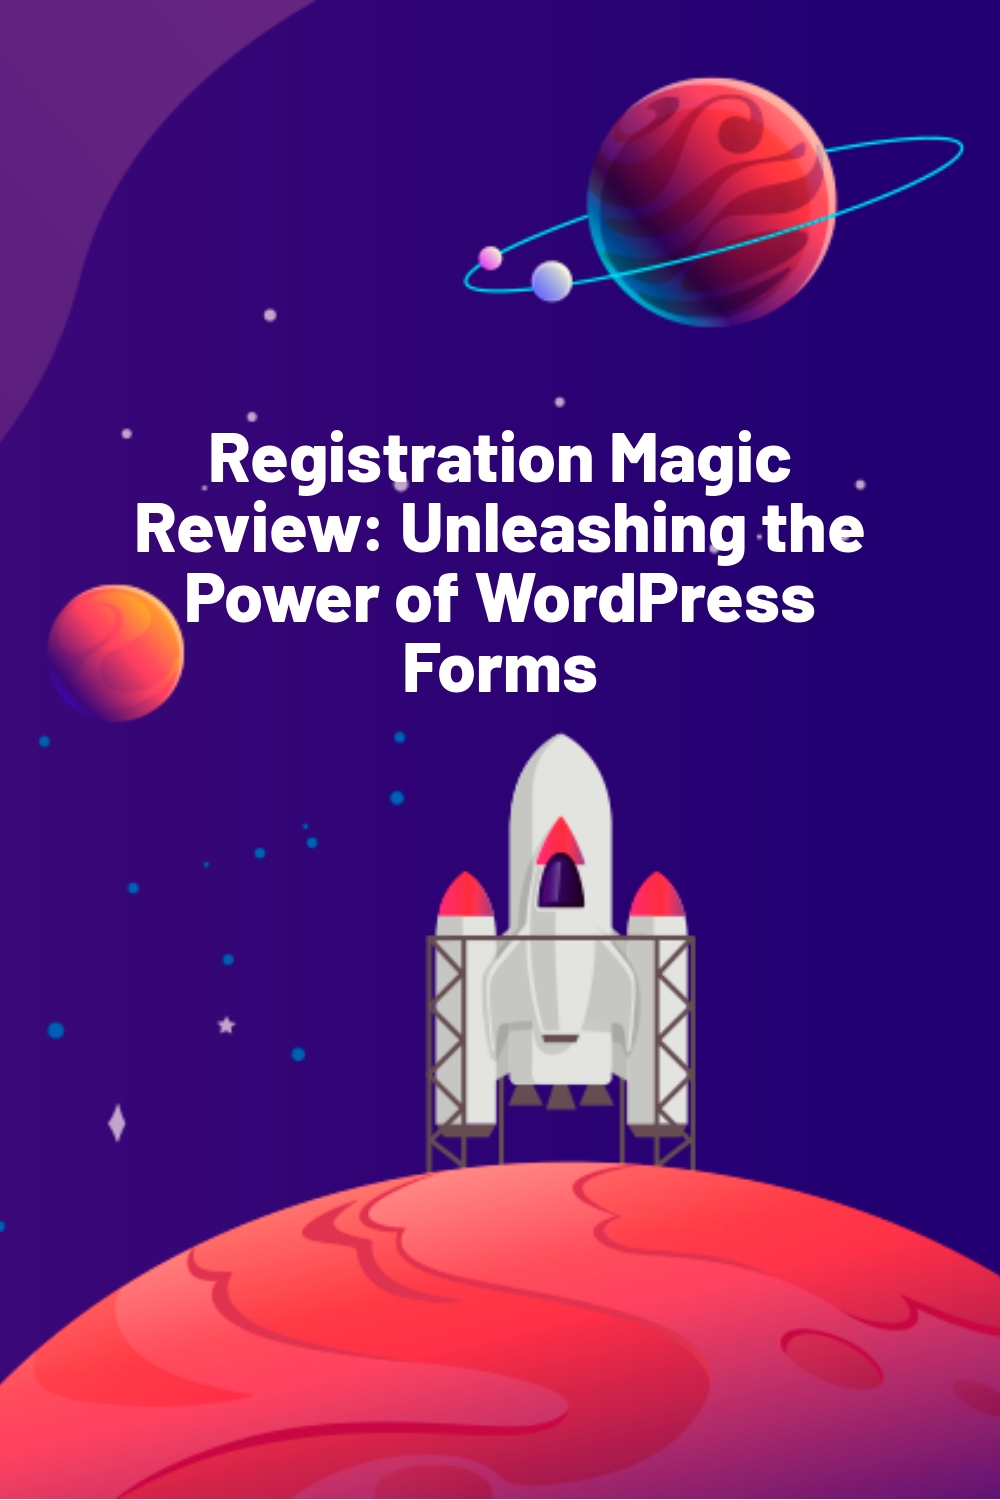 Registration Magic Review: Unleashing the Power of WordPress Forms